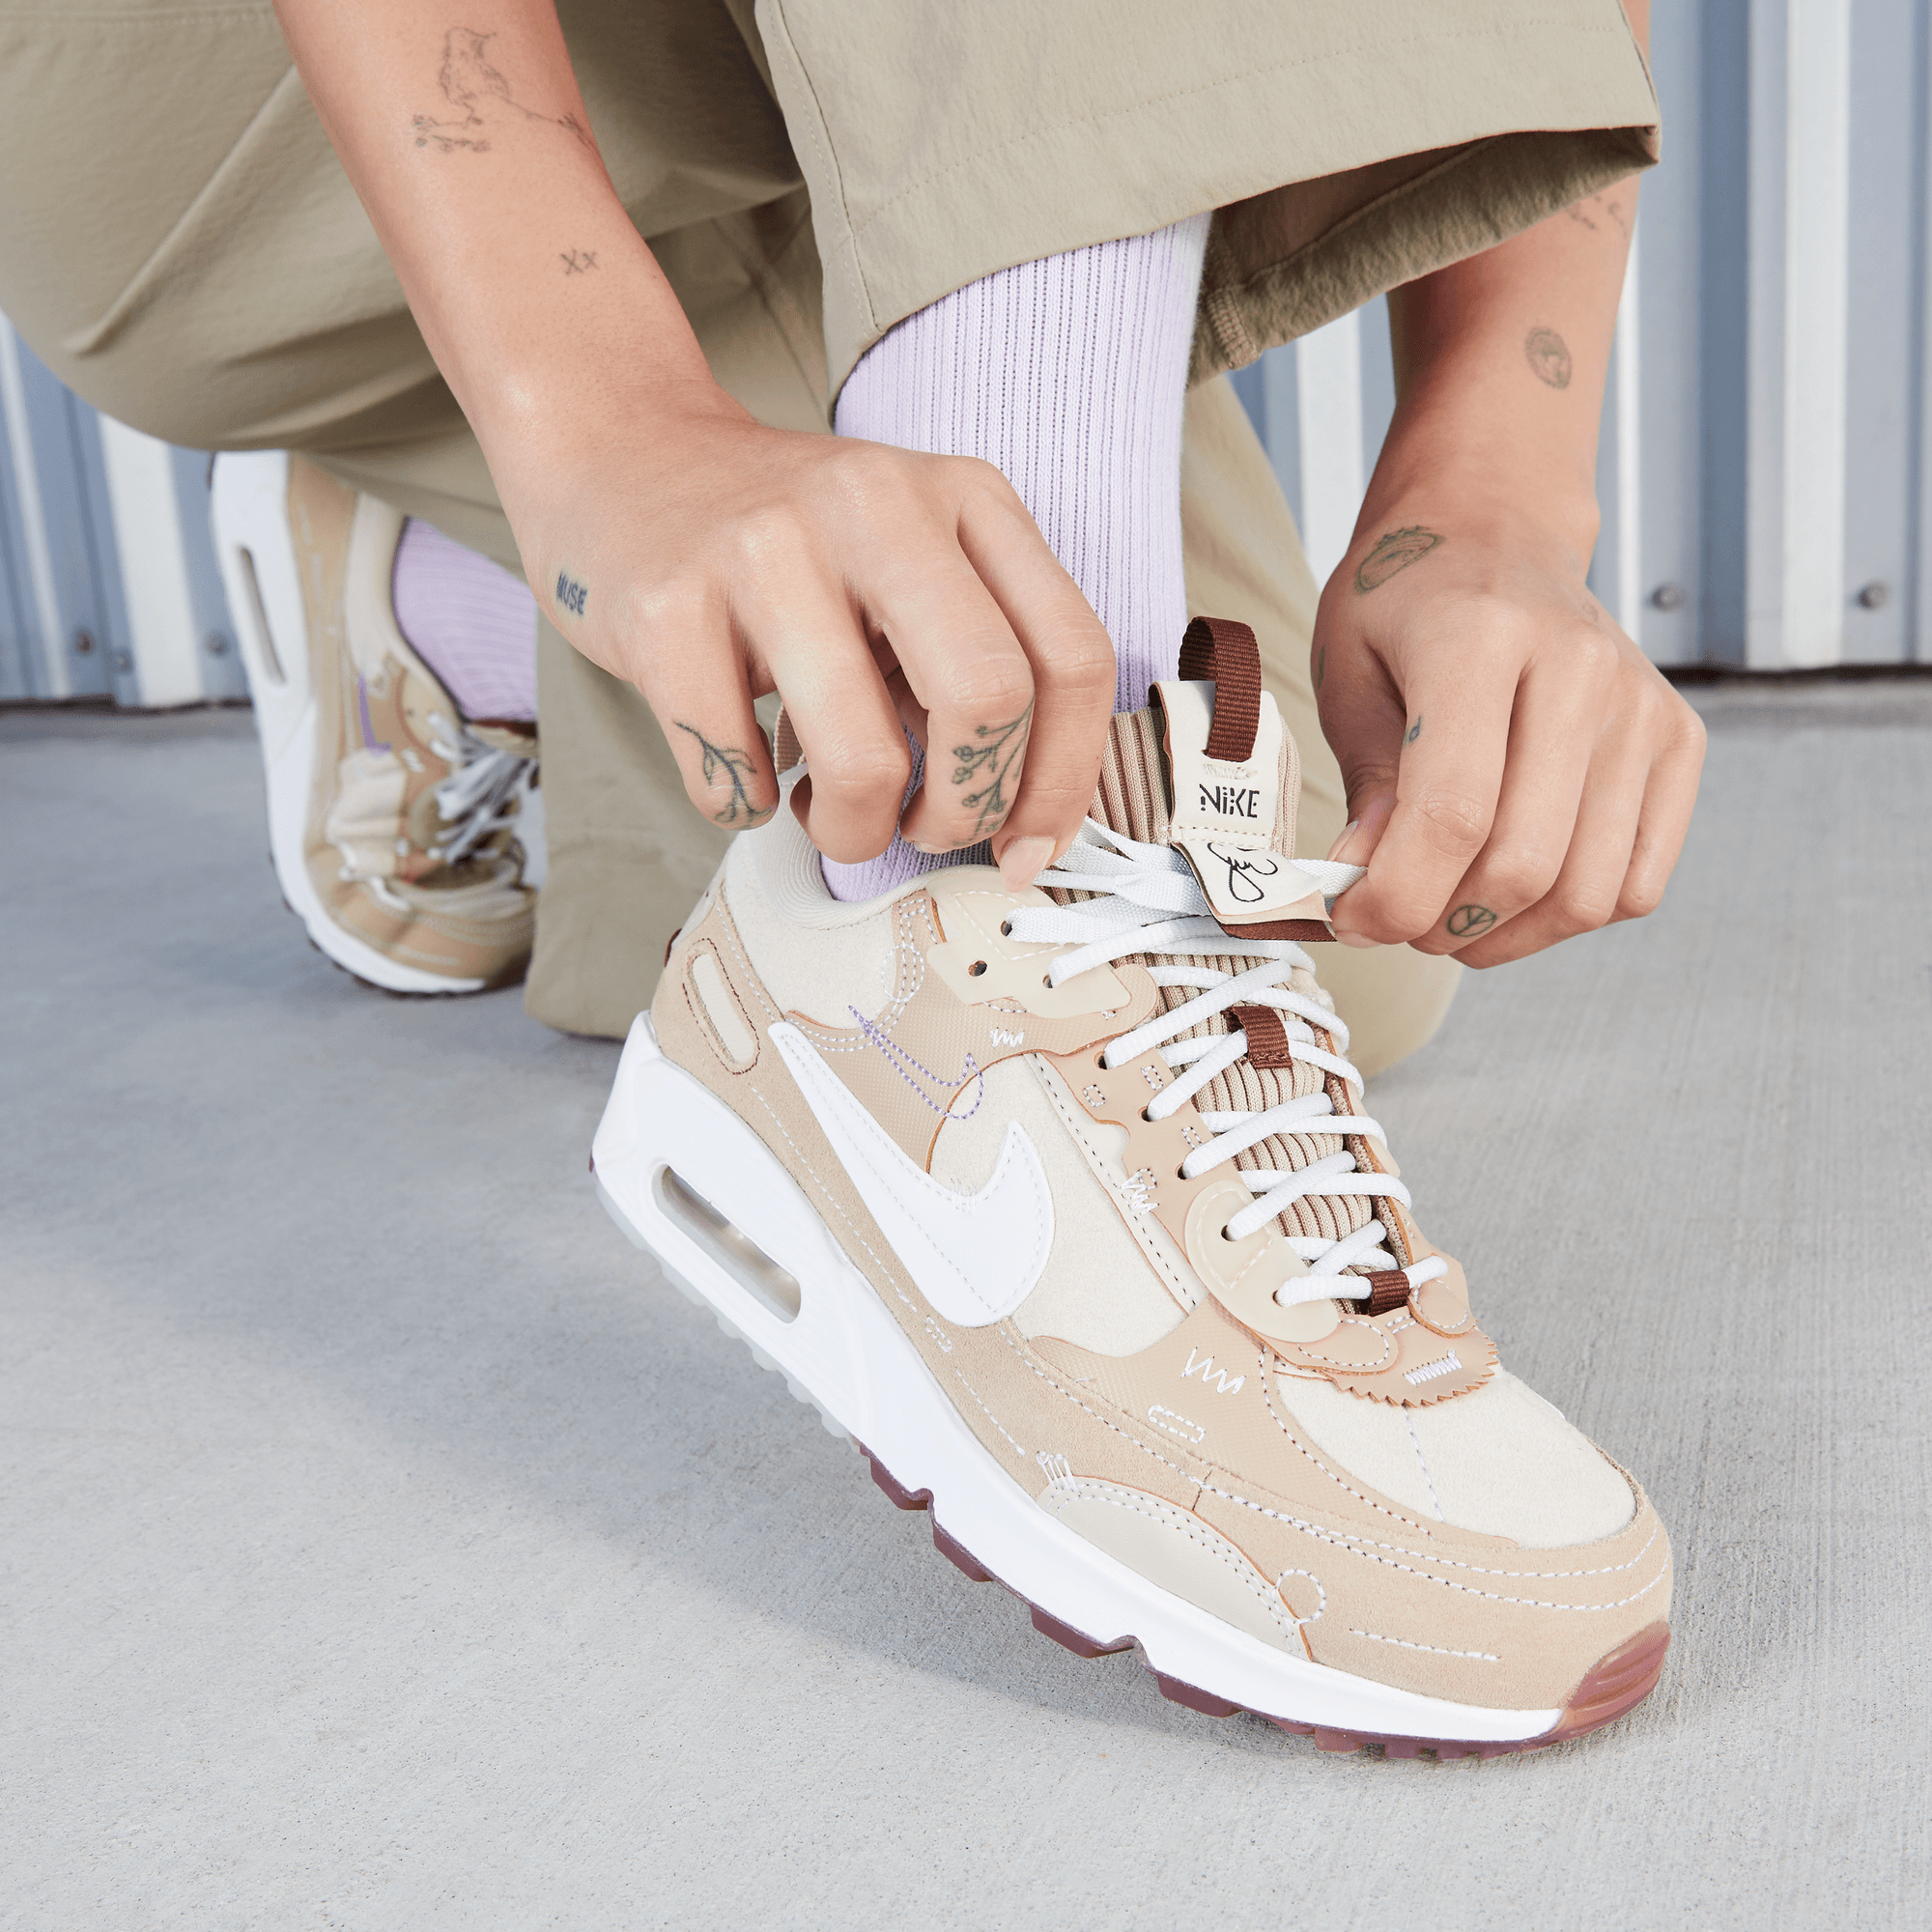 We're Feeling Trippy With The Nike Air Max 90 Futura Aura